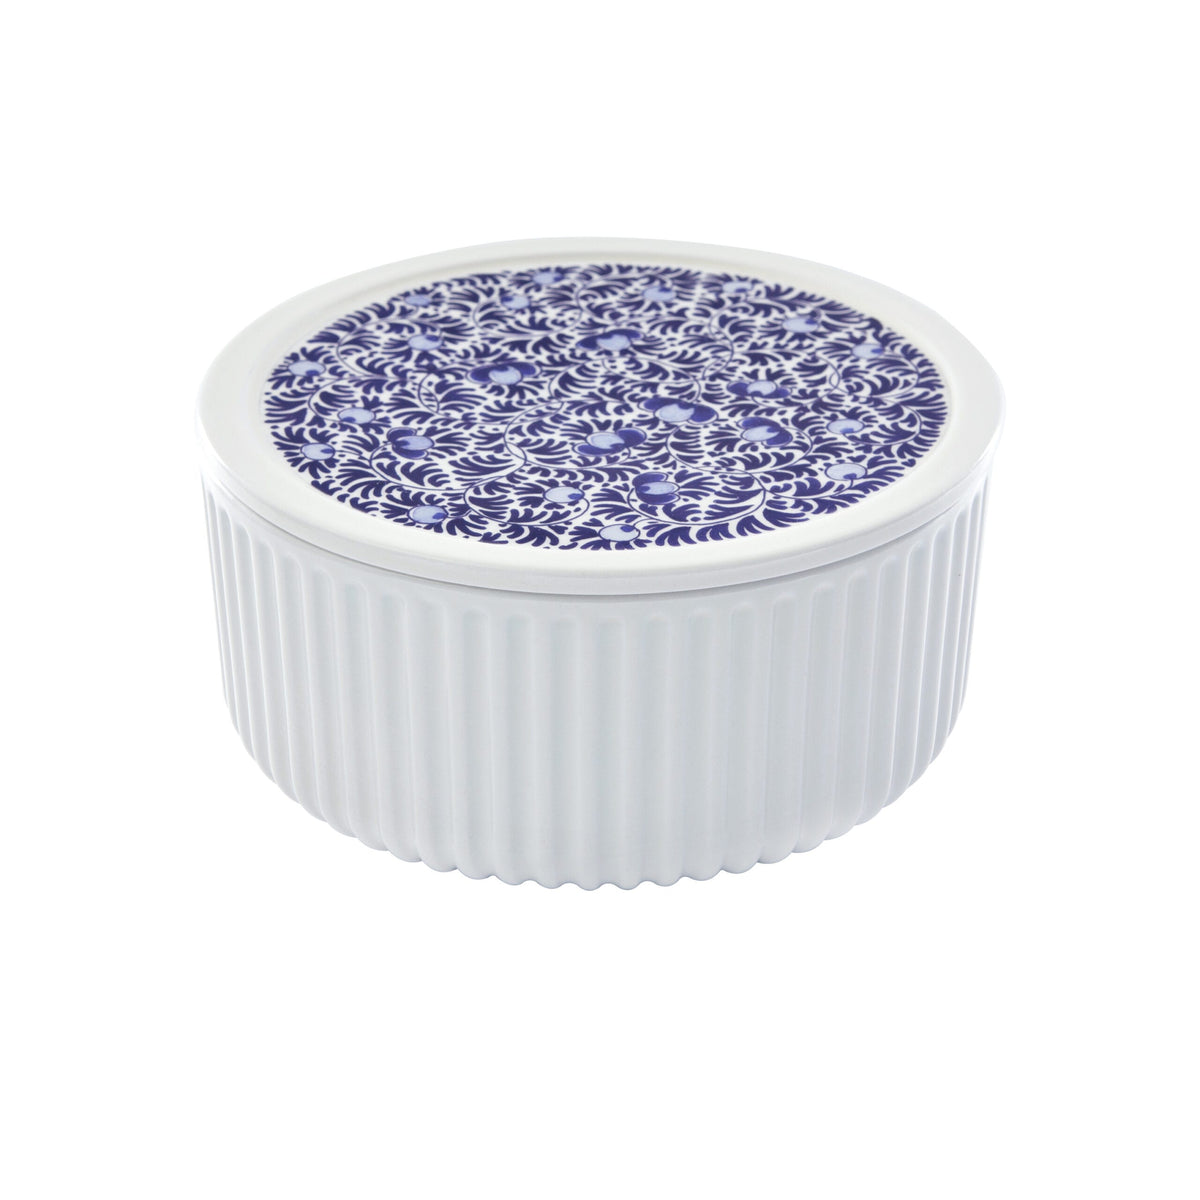 Collar Bowl no. 2 - Blue D1653 Collection by Royal Delft